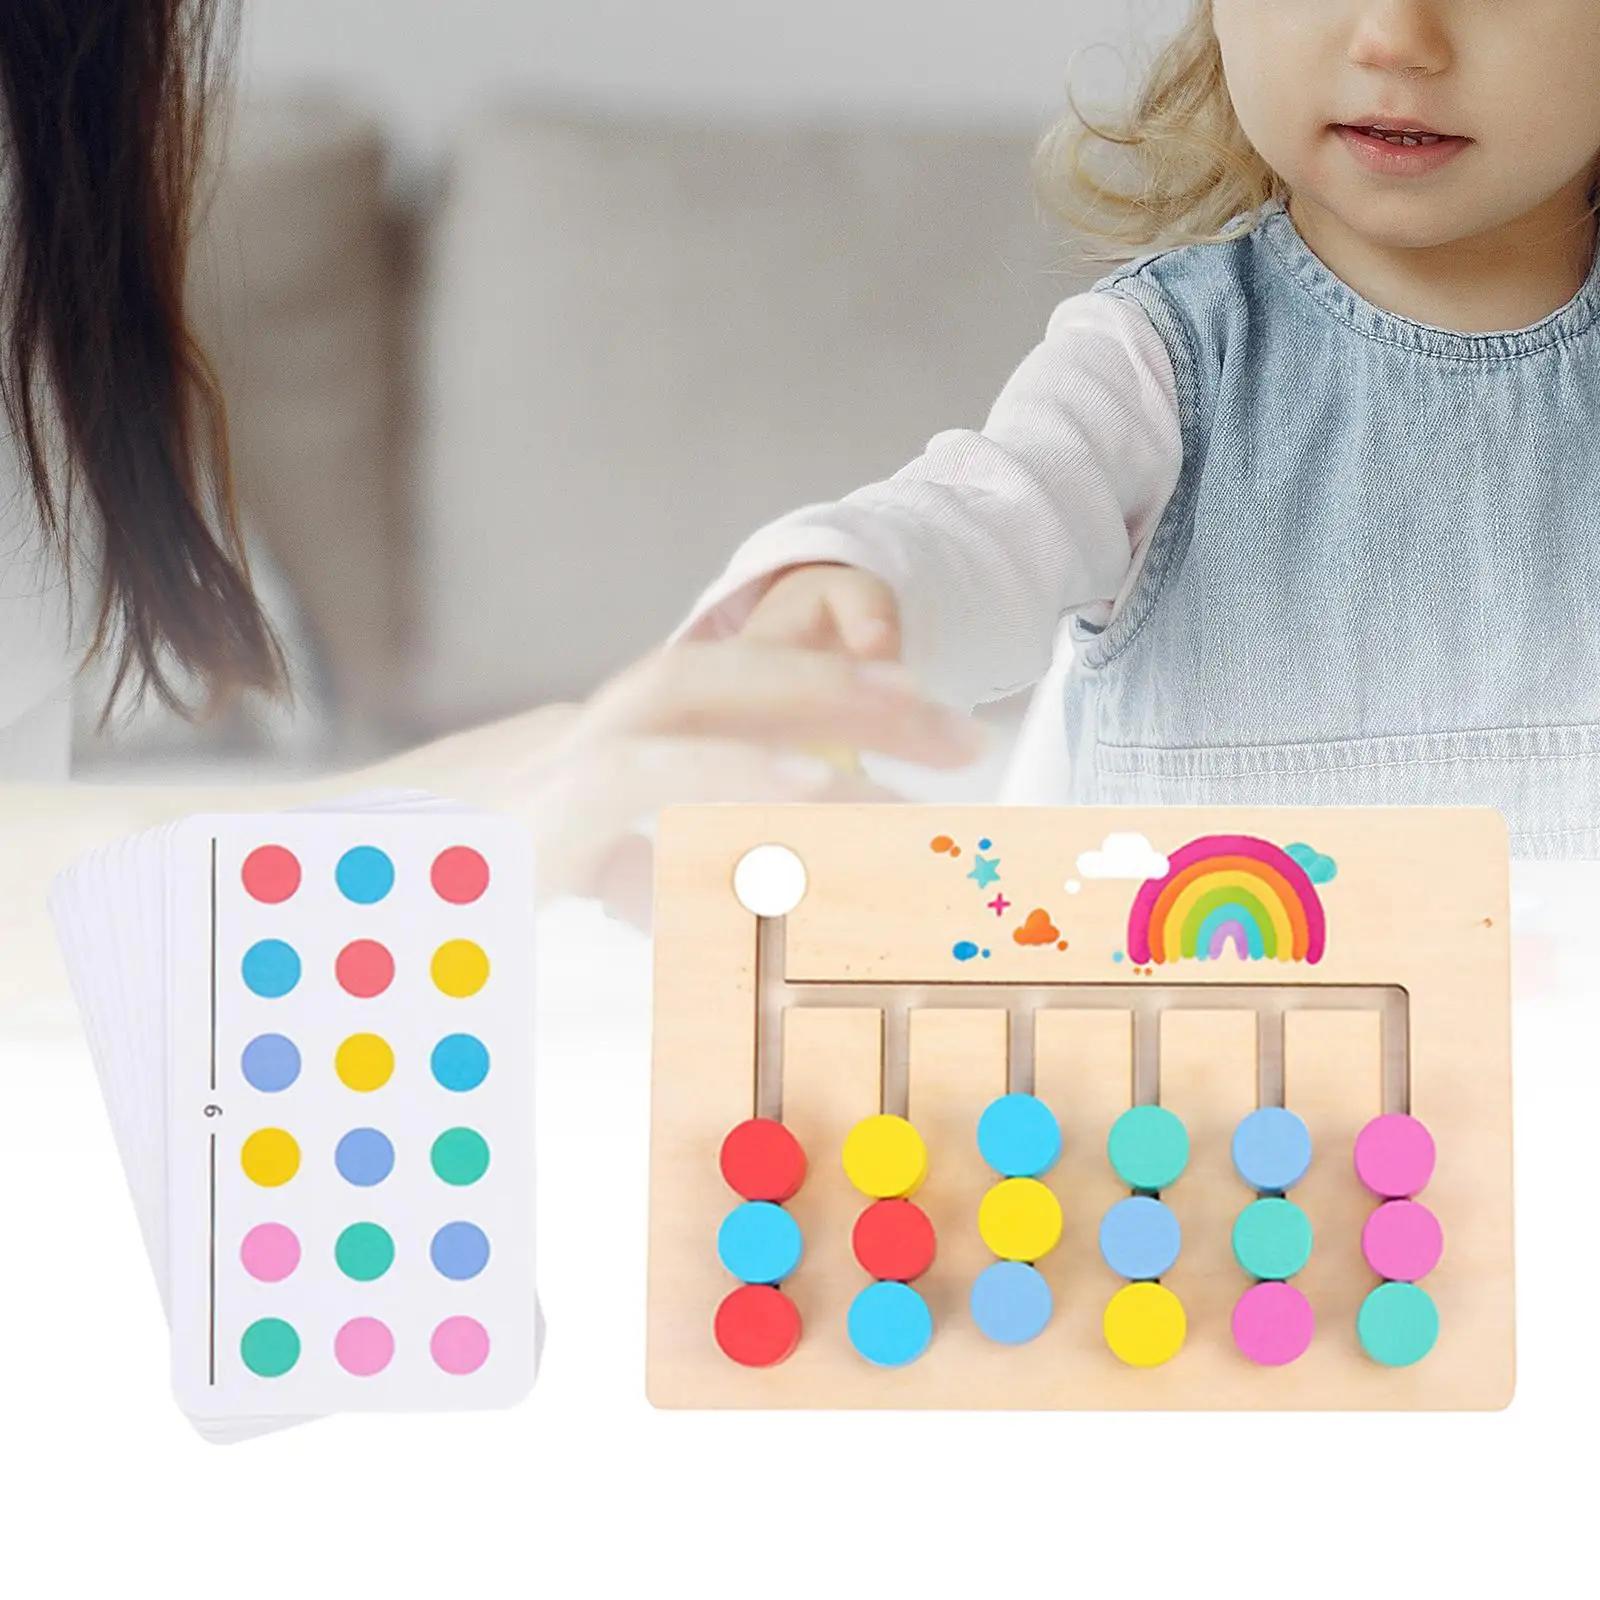 Montessori Toys Slide Puzzle Board Games Early Education Stem Toys Preschool Educational Toys for Child Toddler Birthday Gifts